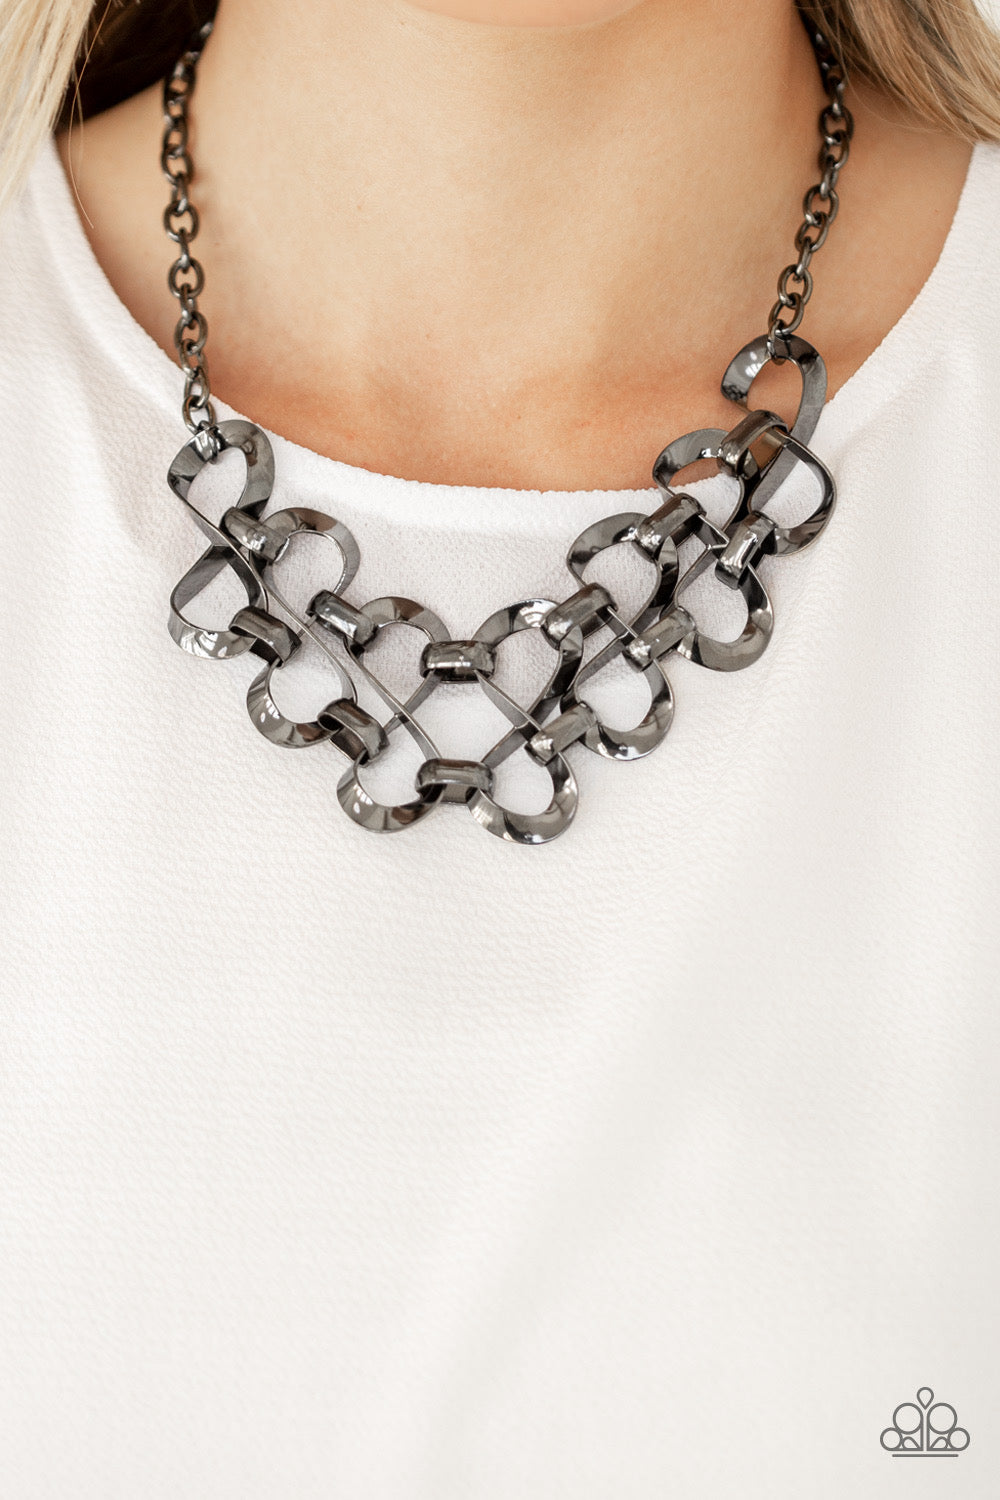 Work,Play and SLAY - Black Necklace 1174N